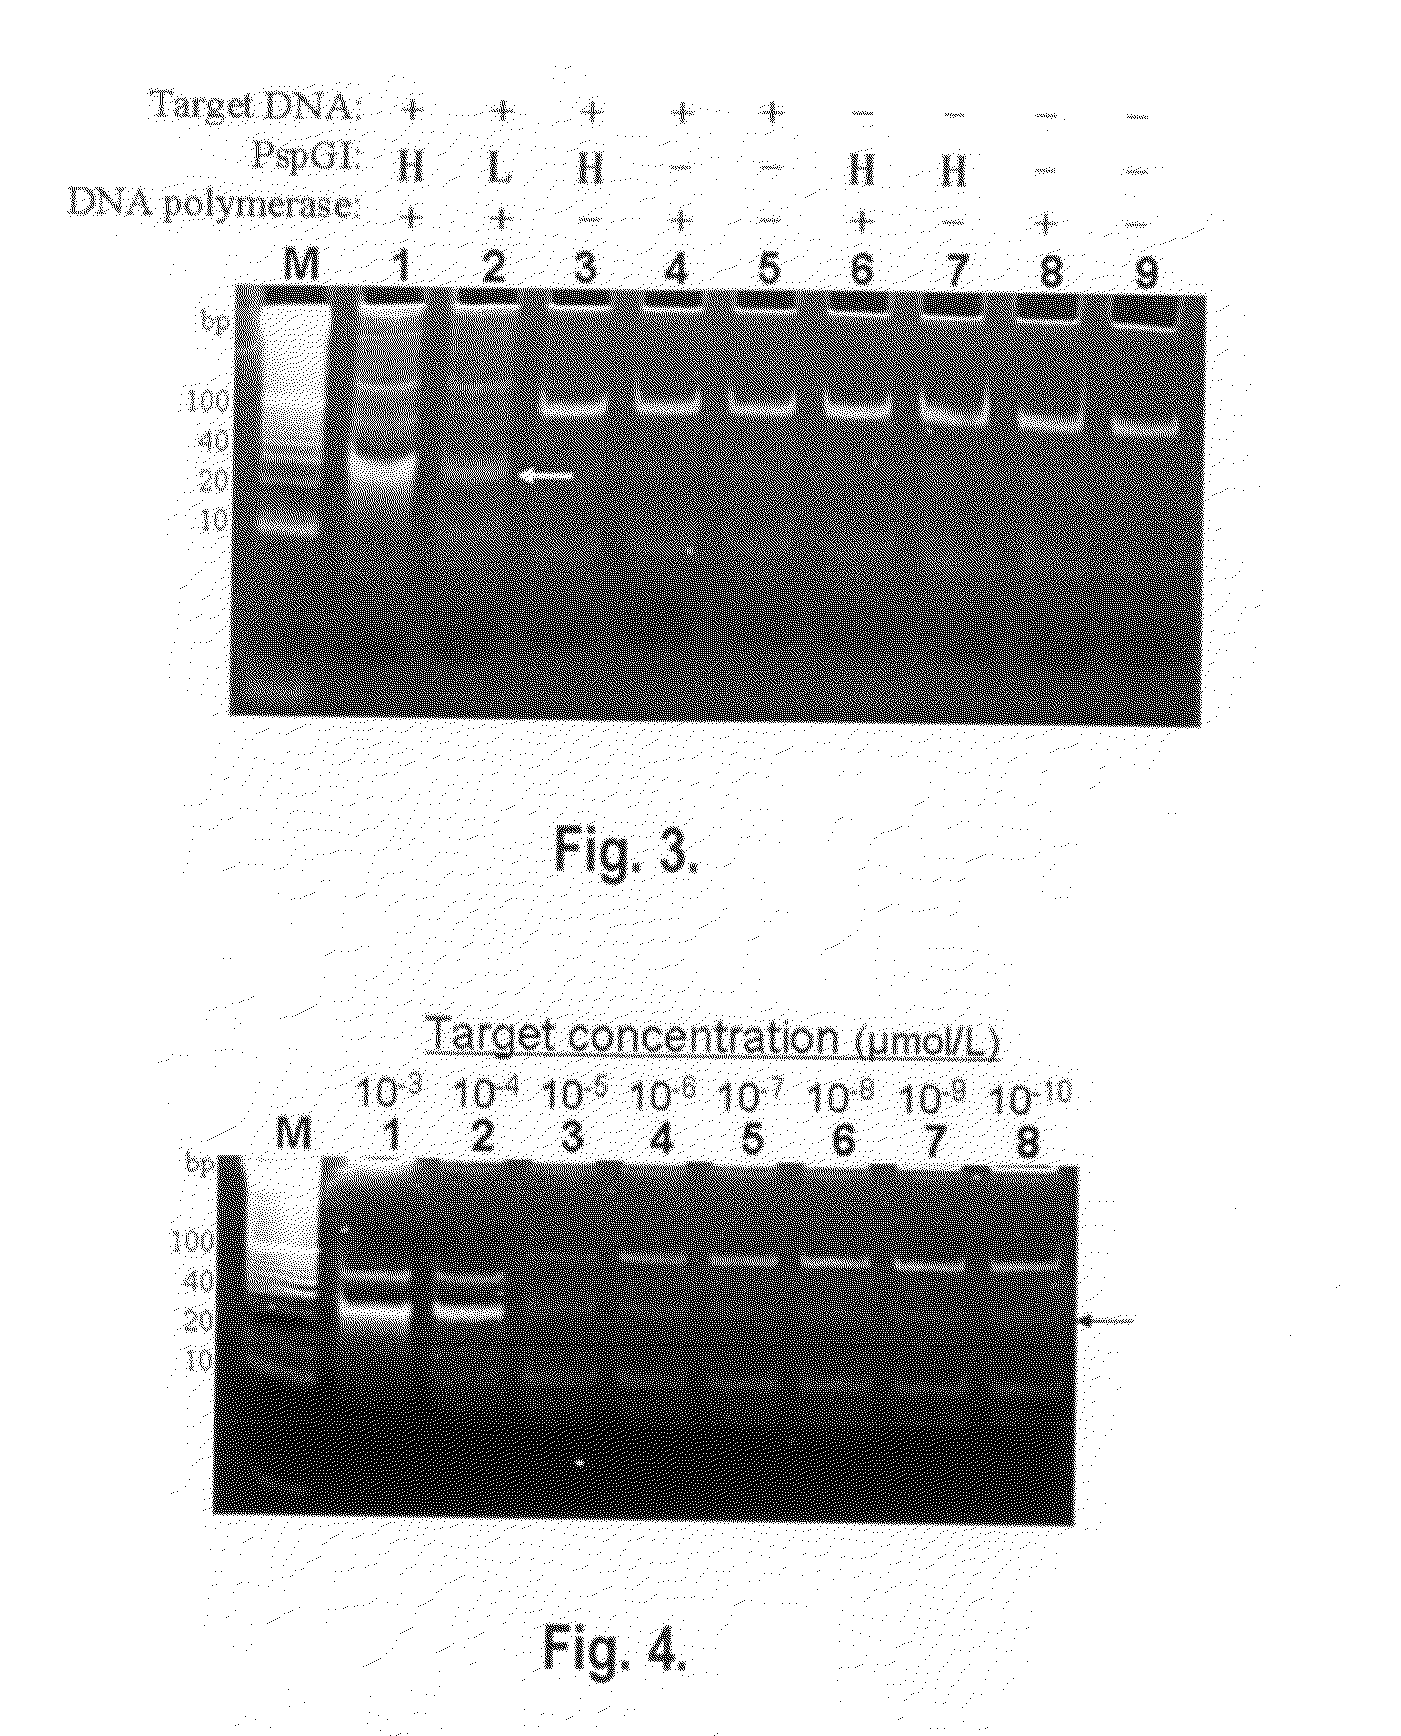 Method for amplifying oligonucleotide and small RNA by using polymerase-endonuclease chain reaction